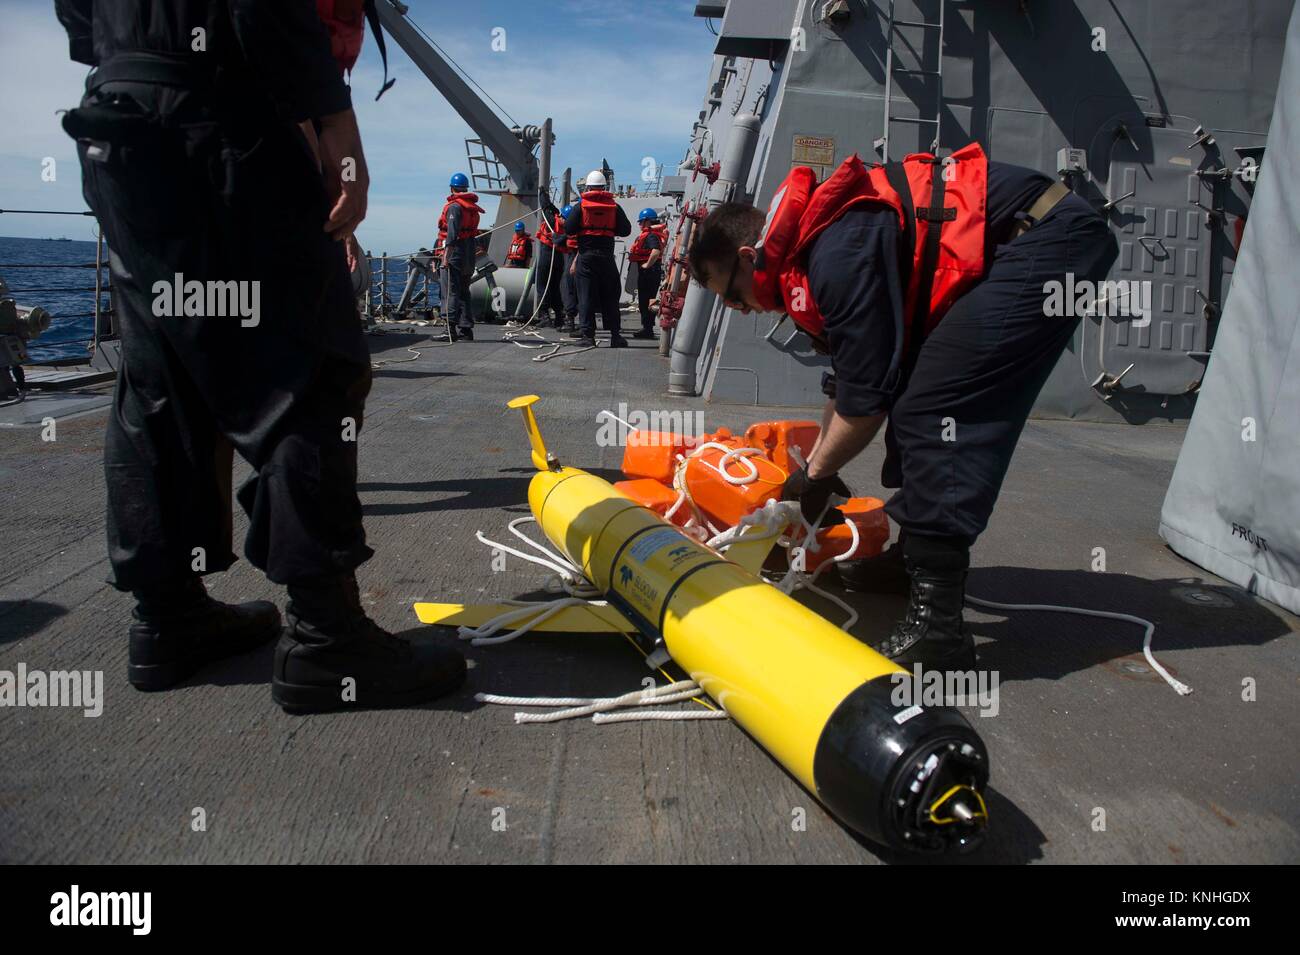 U.S. sailors aboard the USN Arleigh Burke-class guided-missile destroyer USS Mustin recover a U.S. Navy Ocean Glider Unmanned Underwater Vehicle December 20, 2016 in the South China Sea. (photo by Joshua Mortensen  via Planetpix) Stock Photo